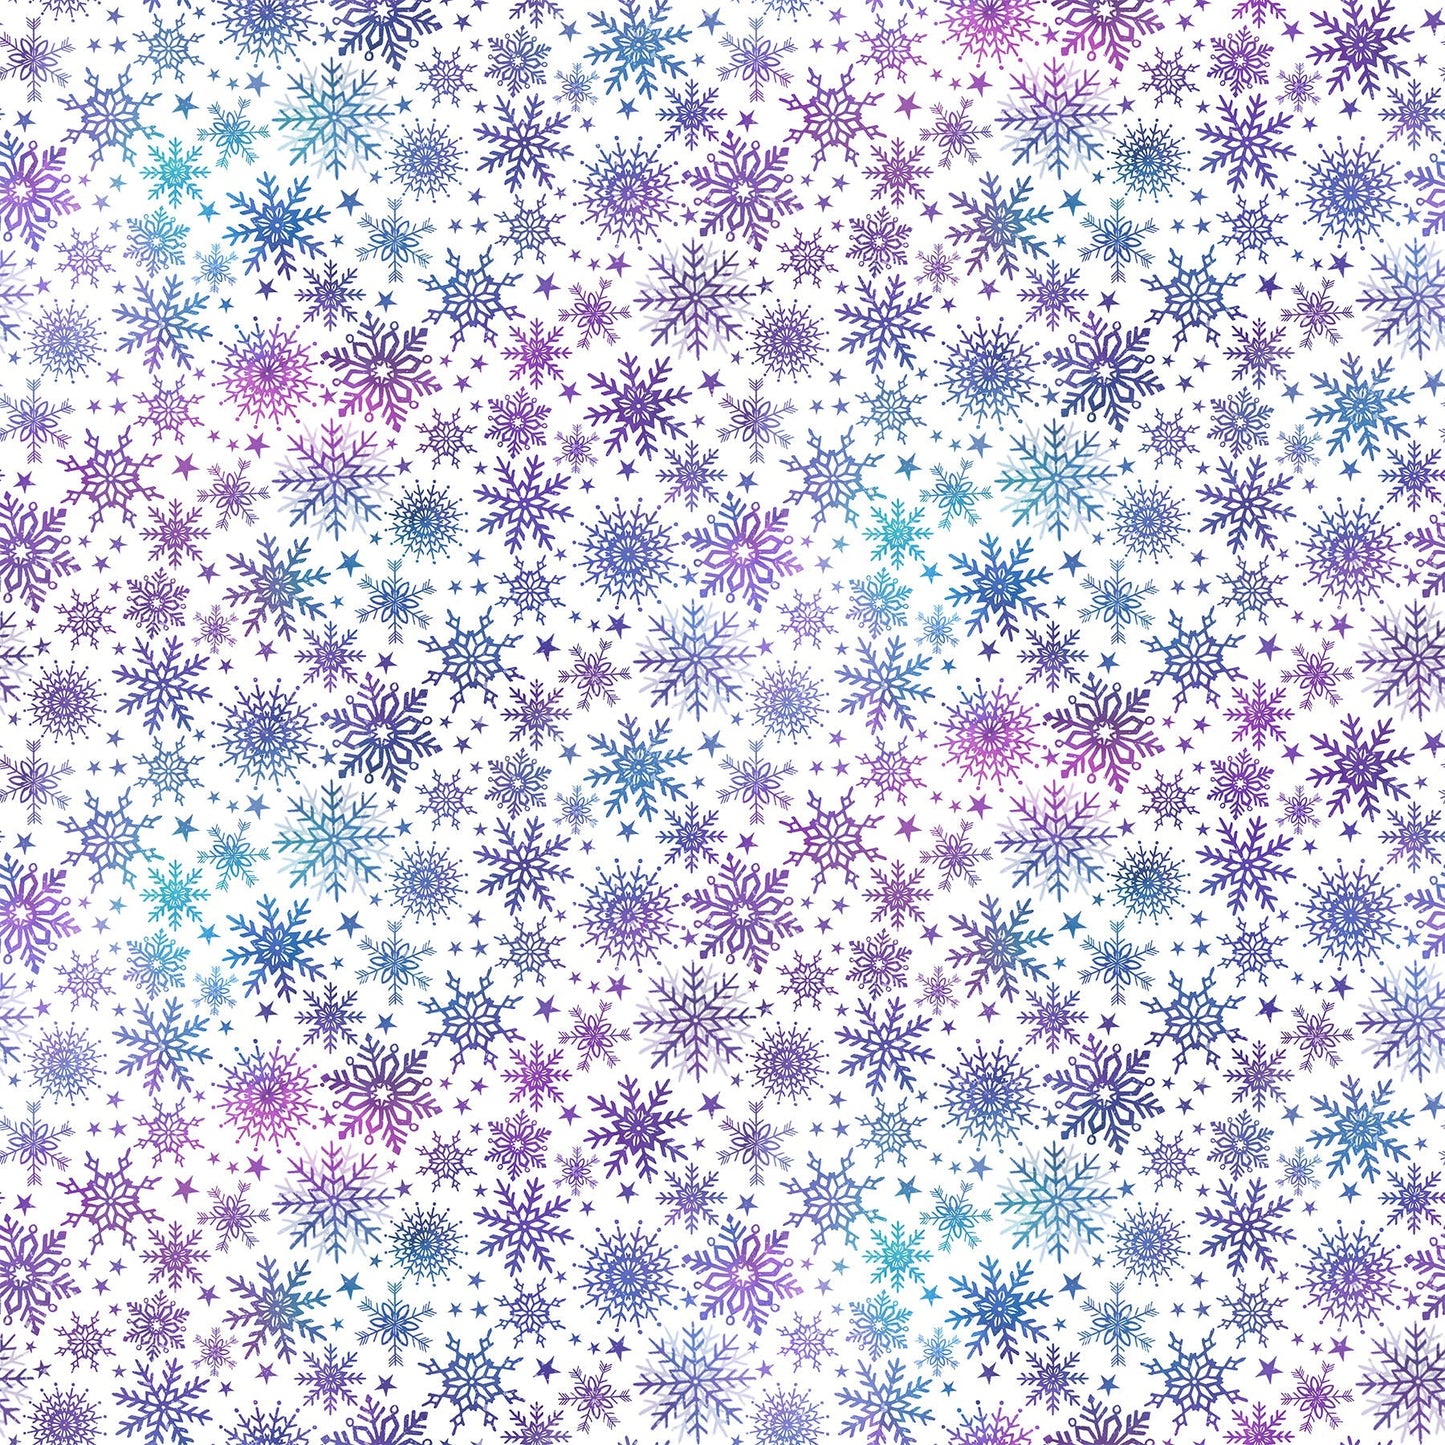 Northcott Fabric by the Yard Angels on High White Snowflakes Pigment (25361-10)